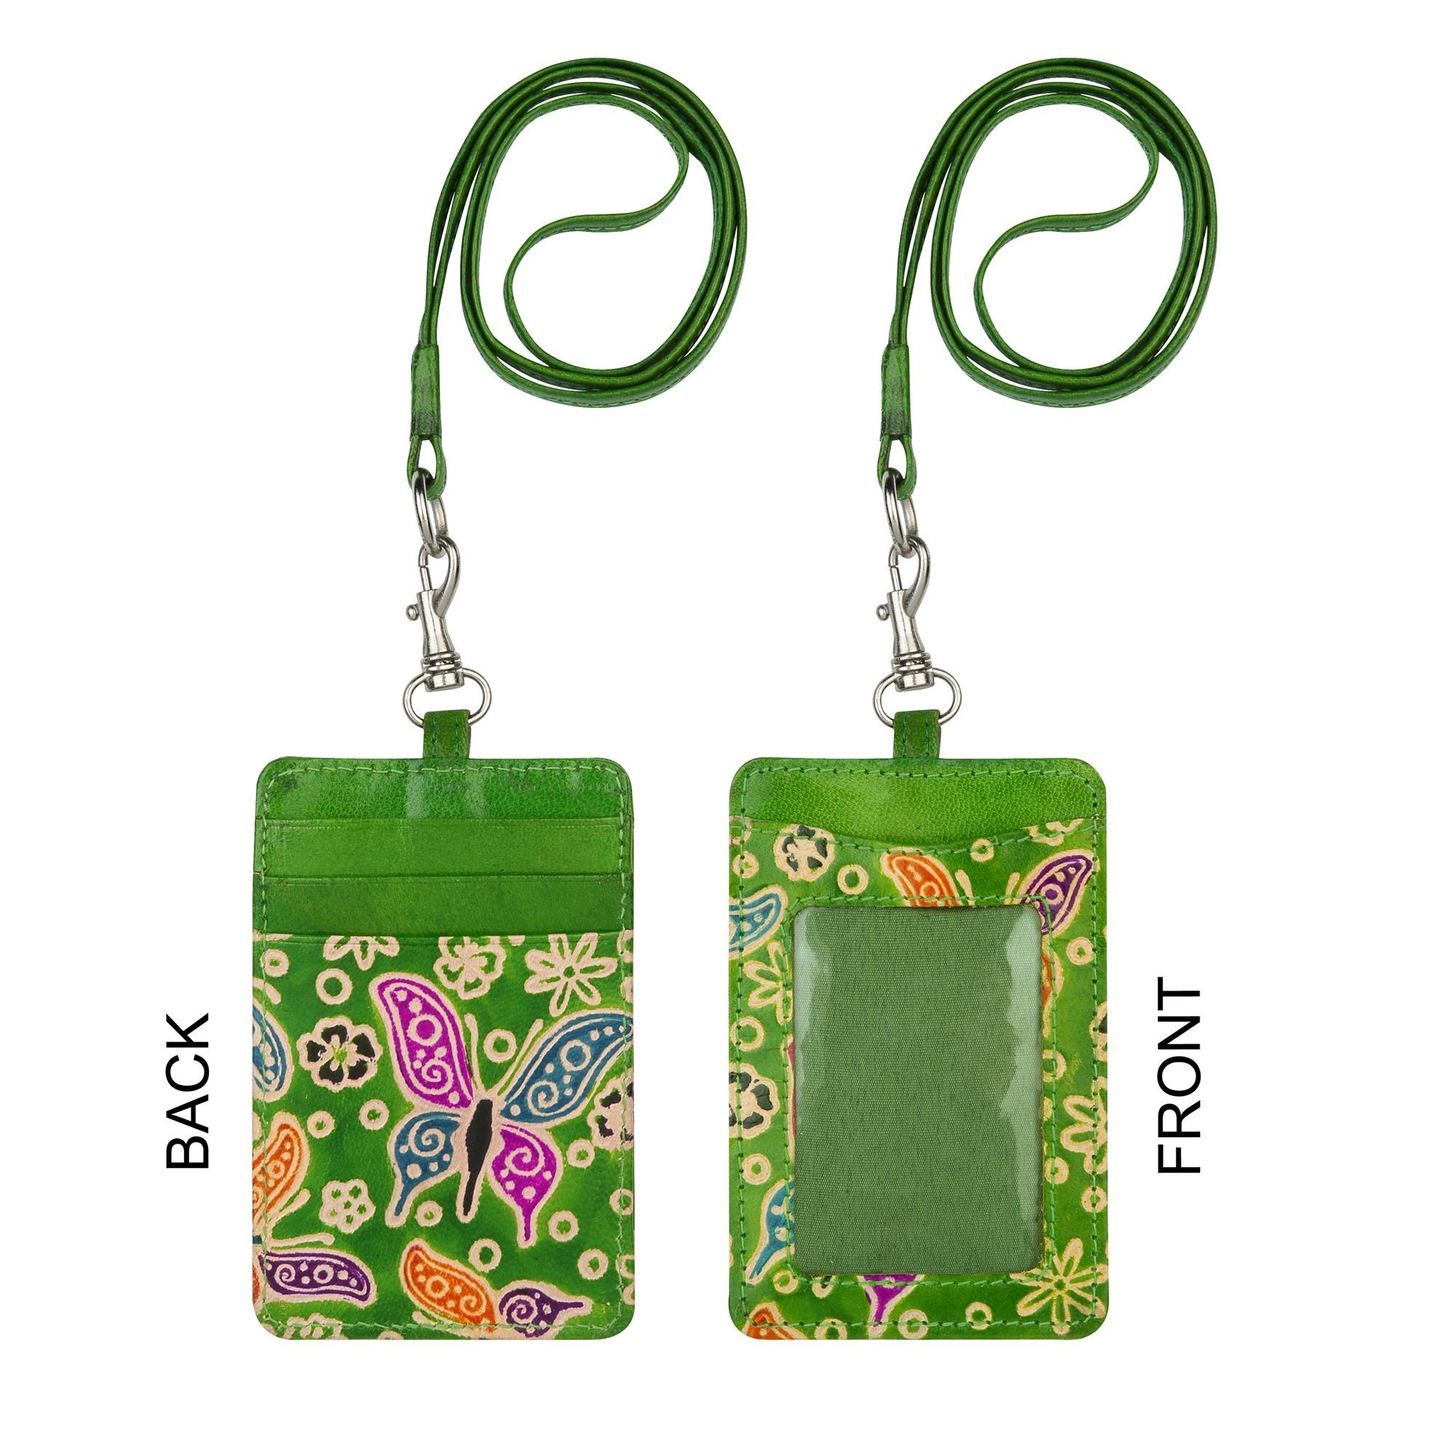 Eco Trends Handpainted Leather Lanyard with ID & Cardholder Butterfly Green